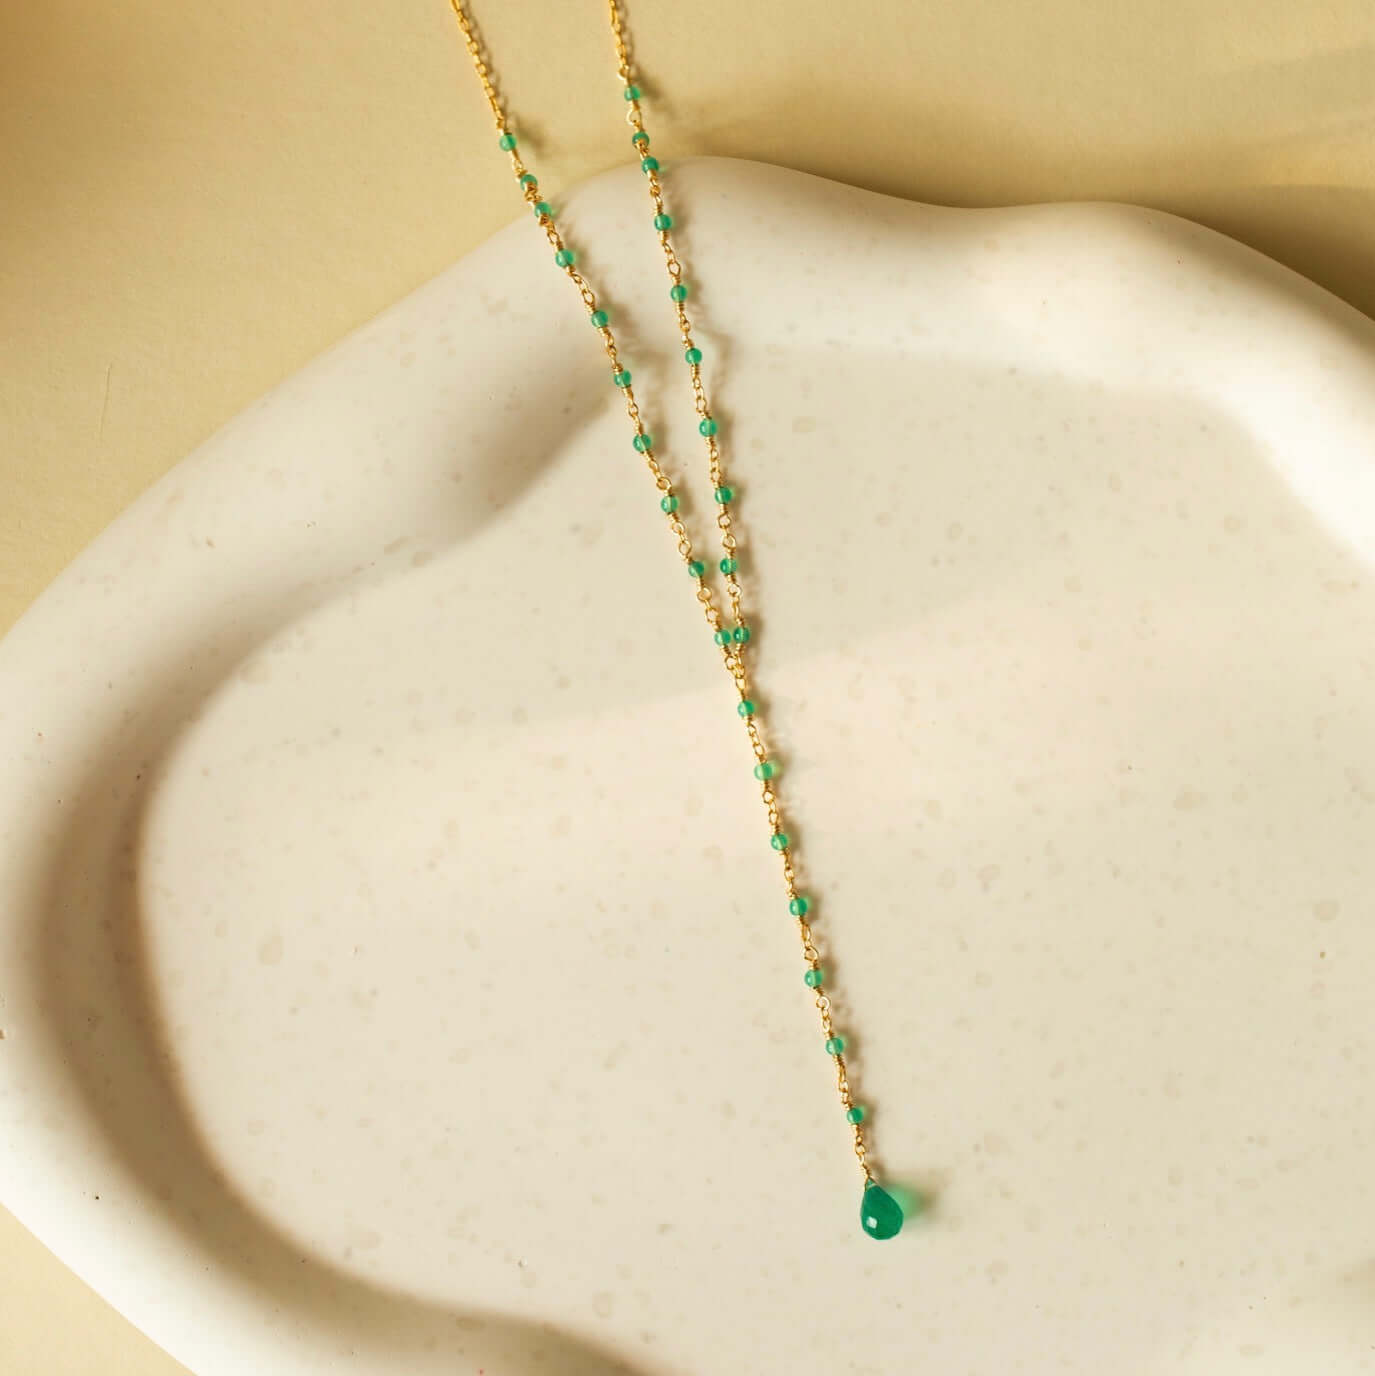 A green onyx necklace rests gracefully on a clay plate, showcasing its vibrant and soothing green hues.